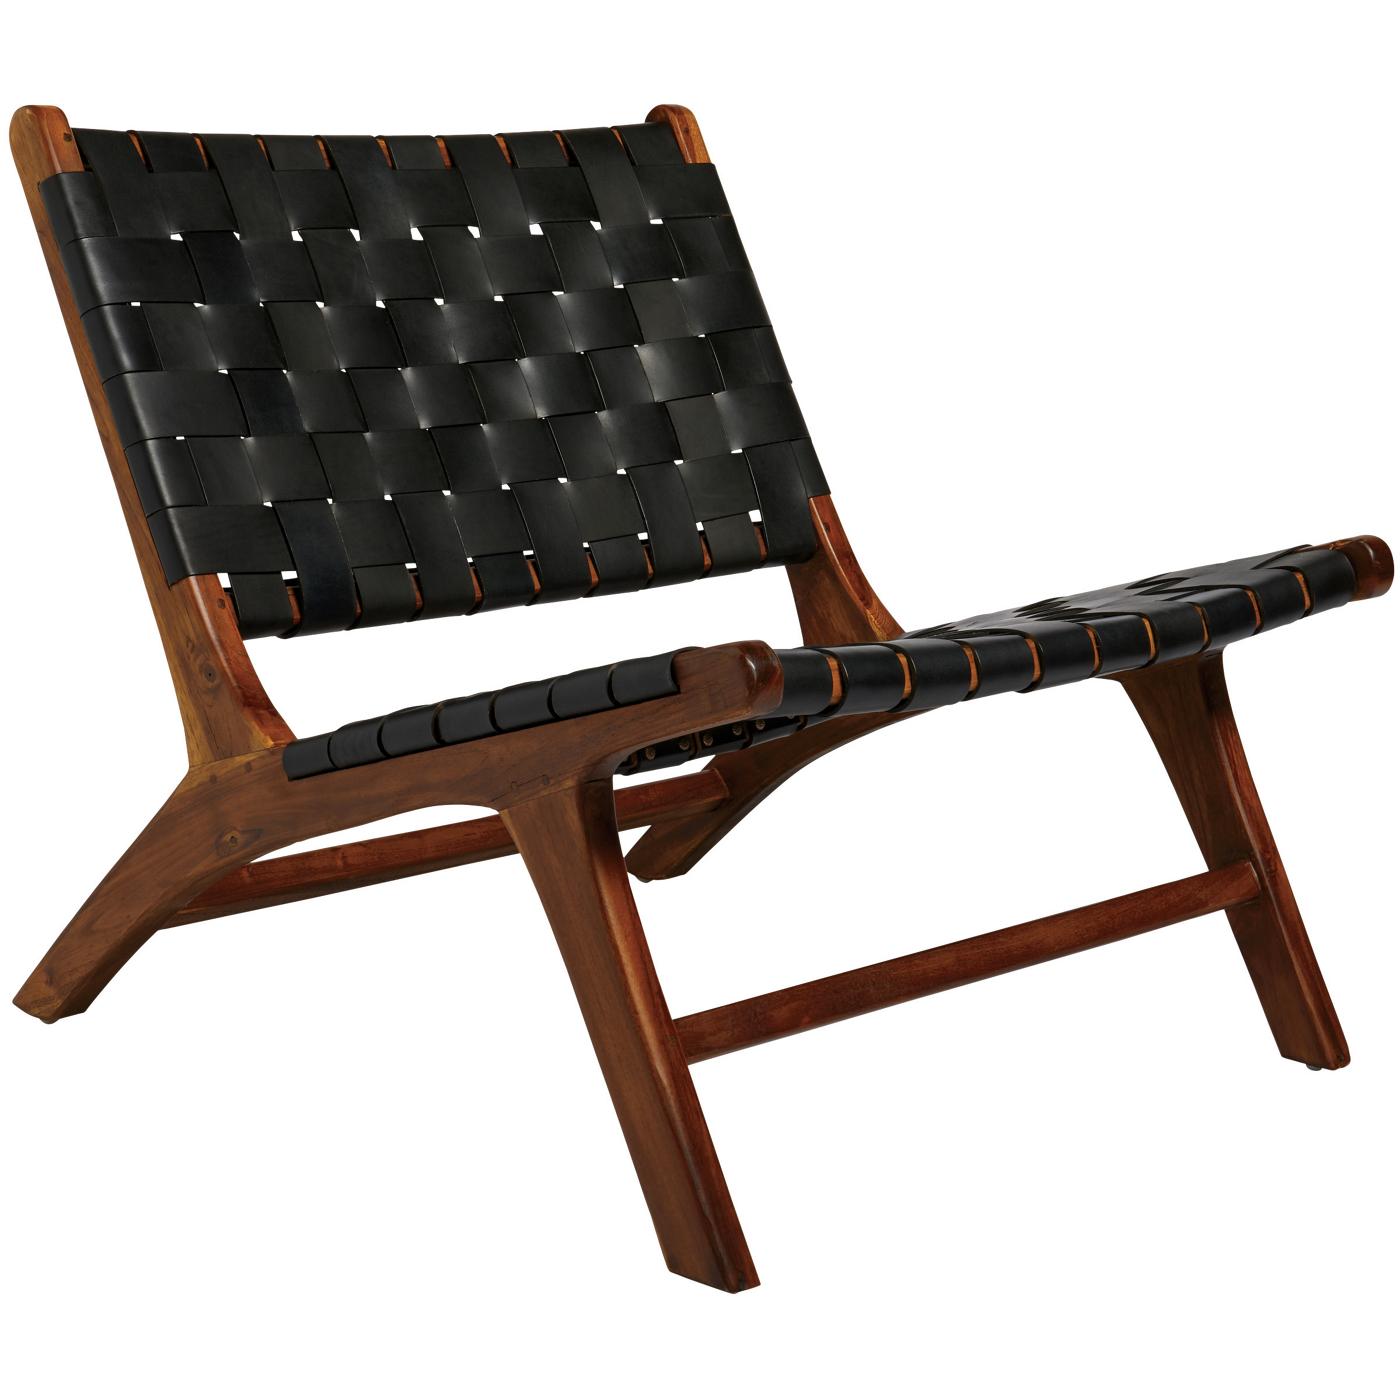 Haven + Key Woven Black Leather Accent Chair with Wood Frame; image 1 of 5